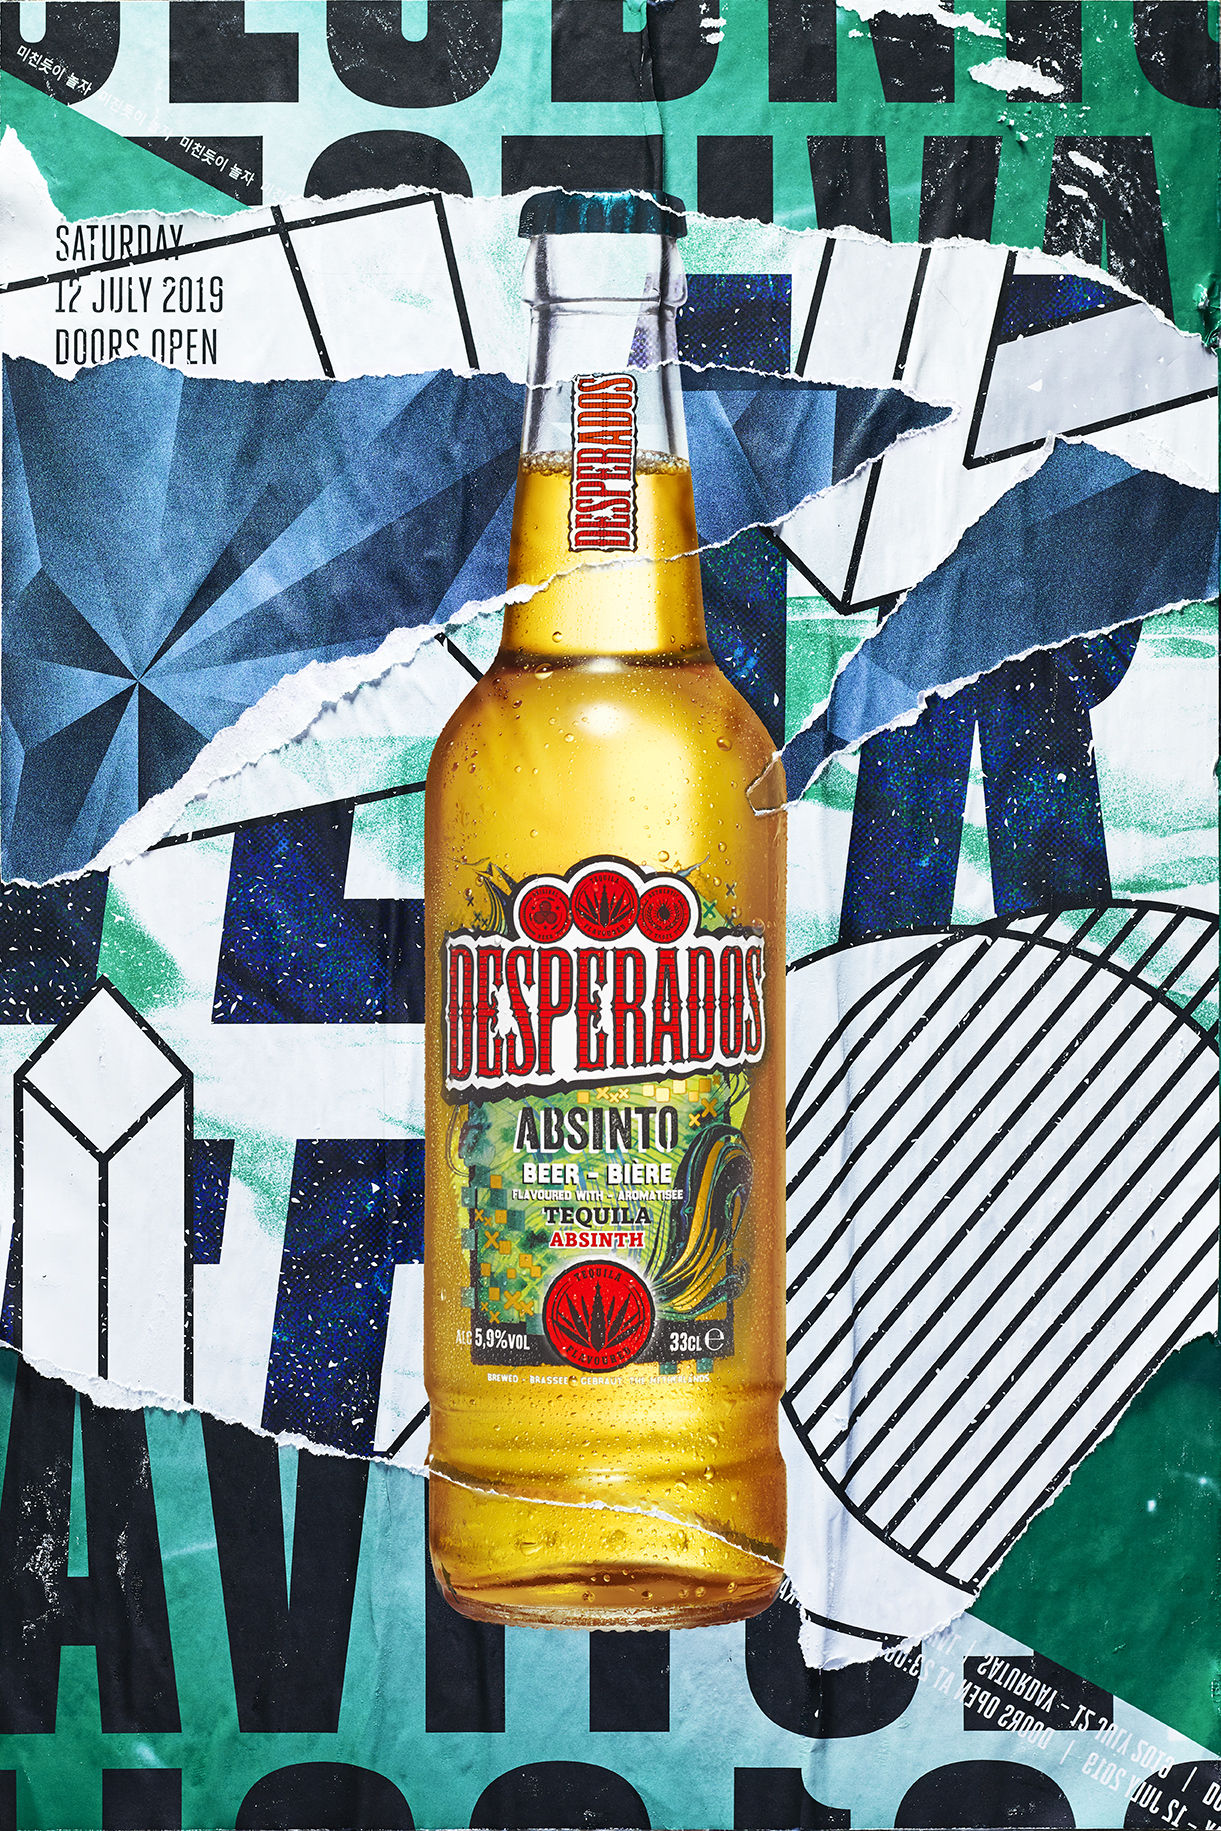 Desperados brings something new to the Uprising Festival: You can buy your  own keg with your friends 